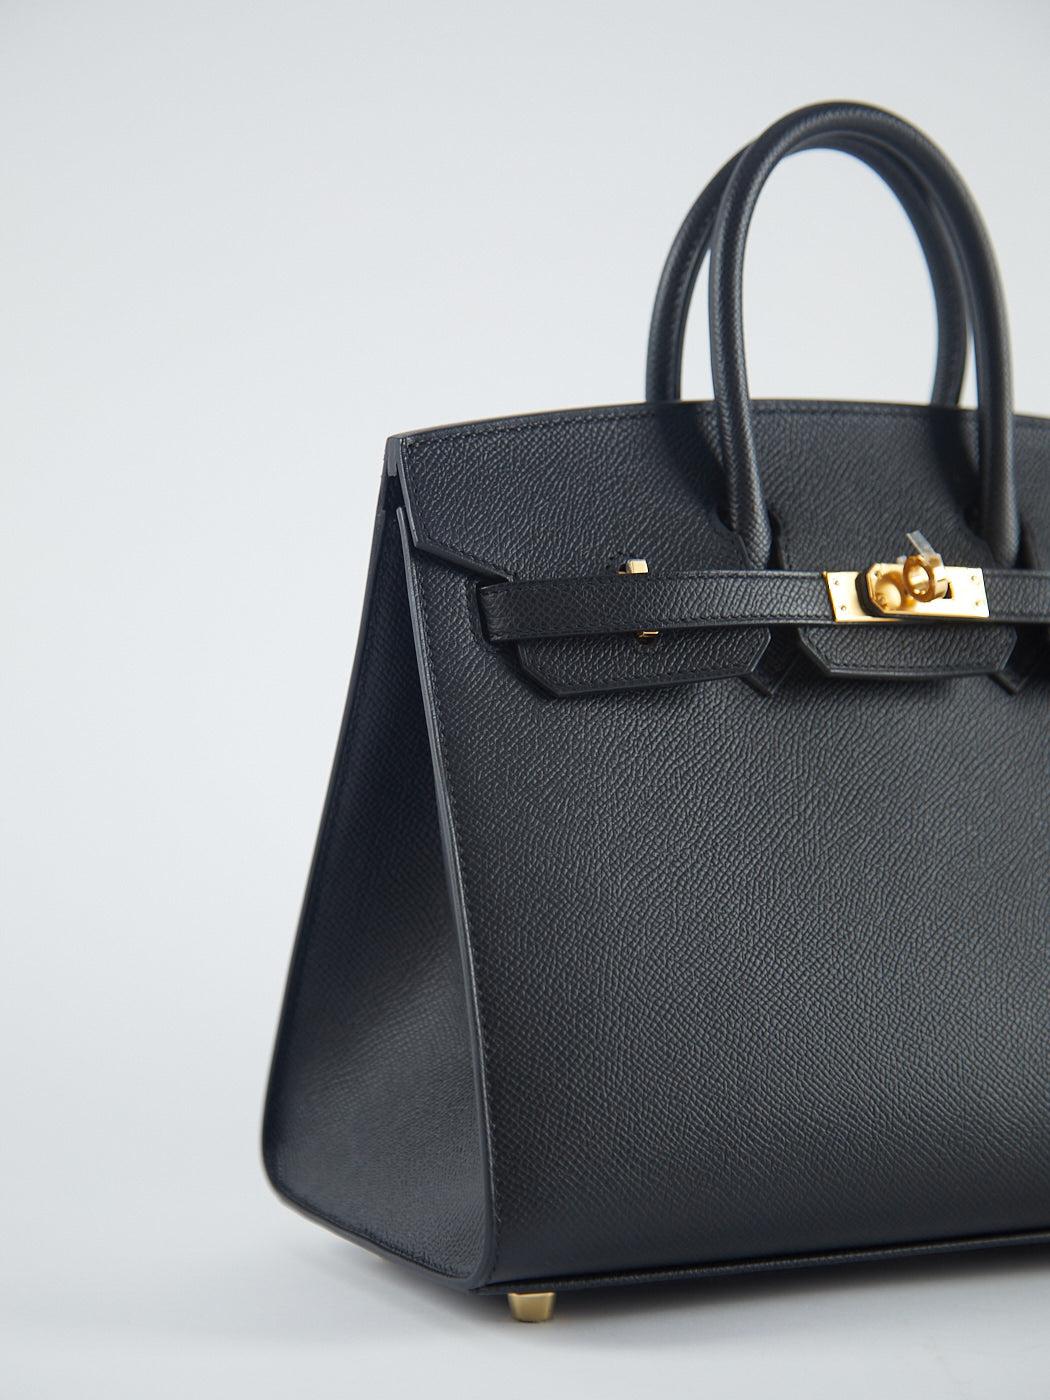 HERMÈS BIRKIN 25CM SELLIER BLACK Epsom Leather with Gold Hardware In Excellent Condition In London, GB